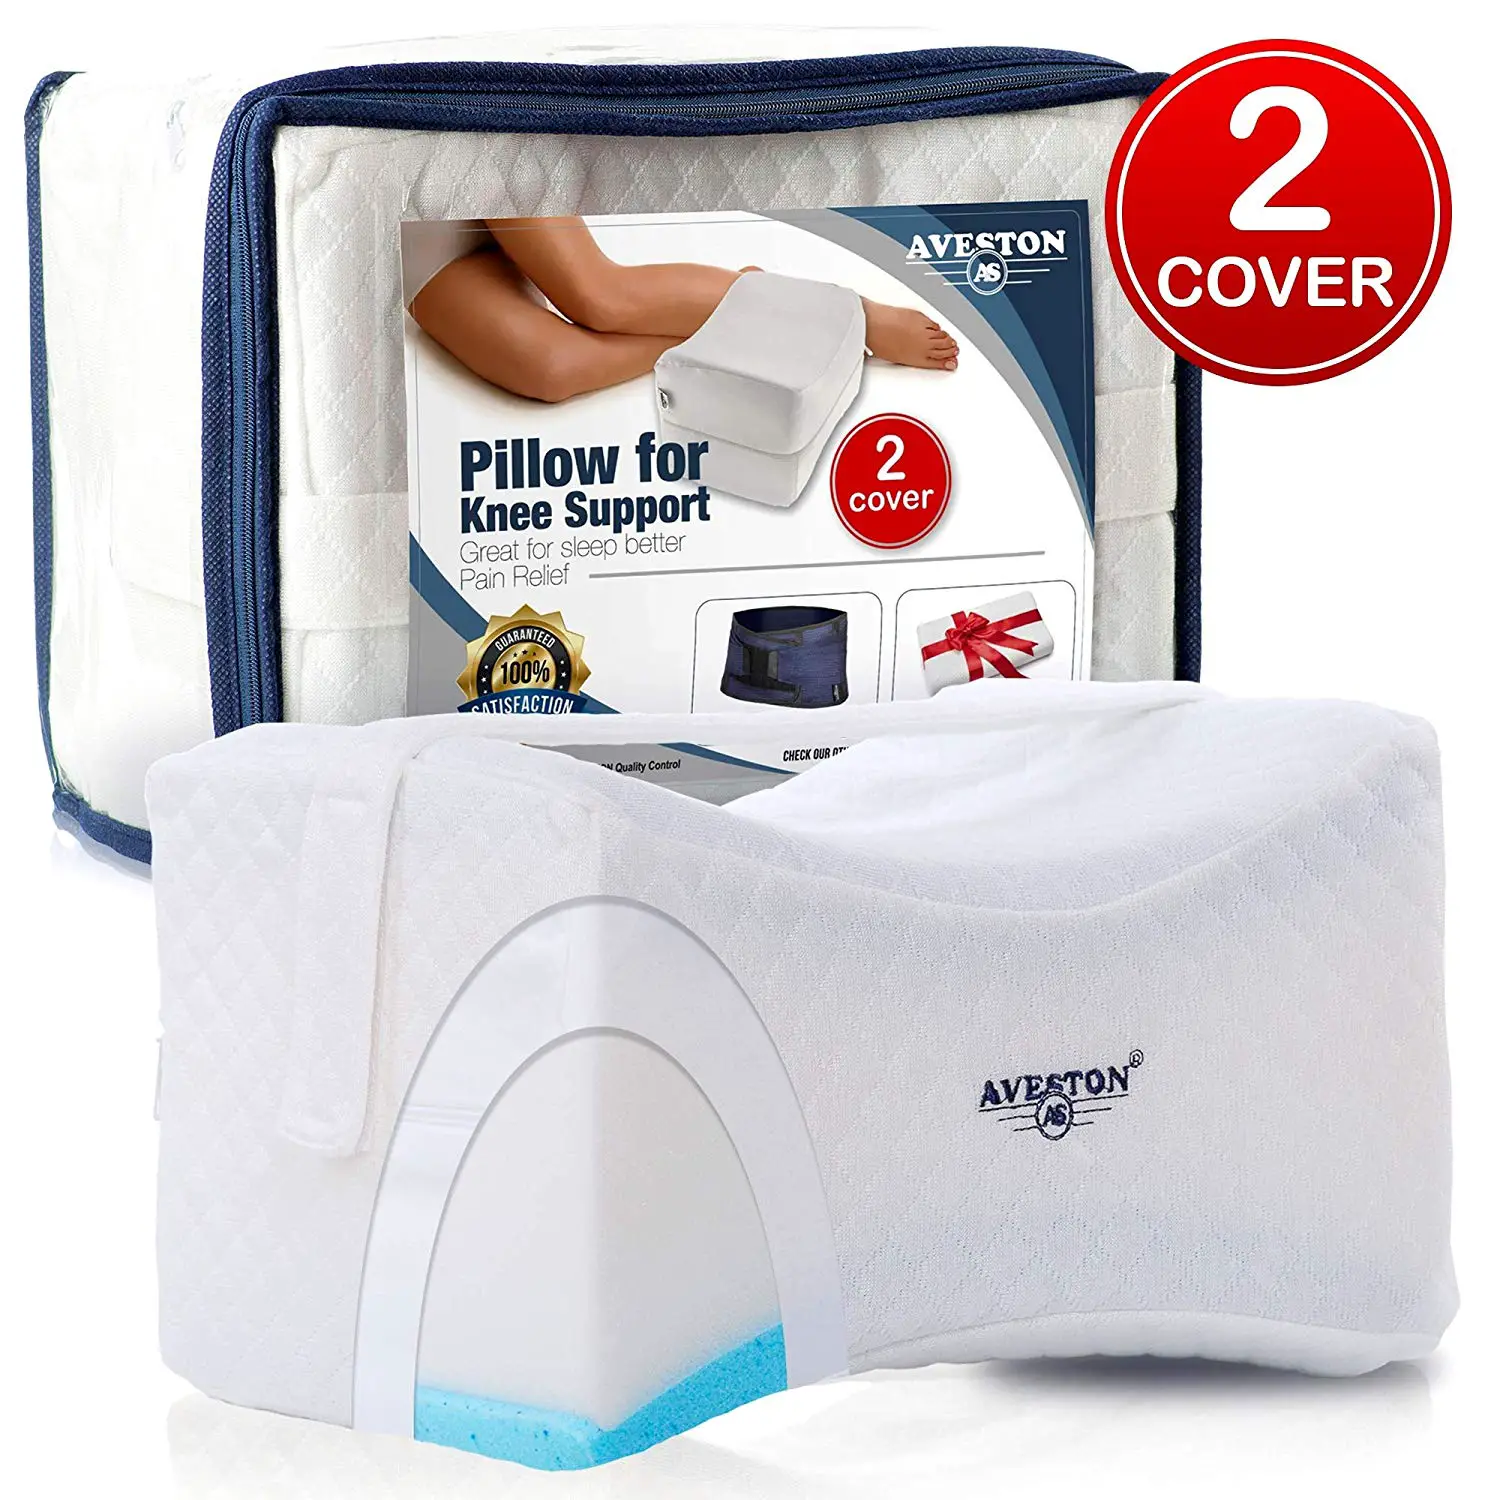 Top 10 Best Knee Pillow for Side Sleepers in 2021 Reviews